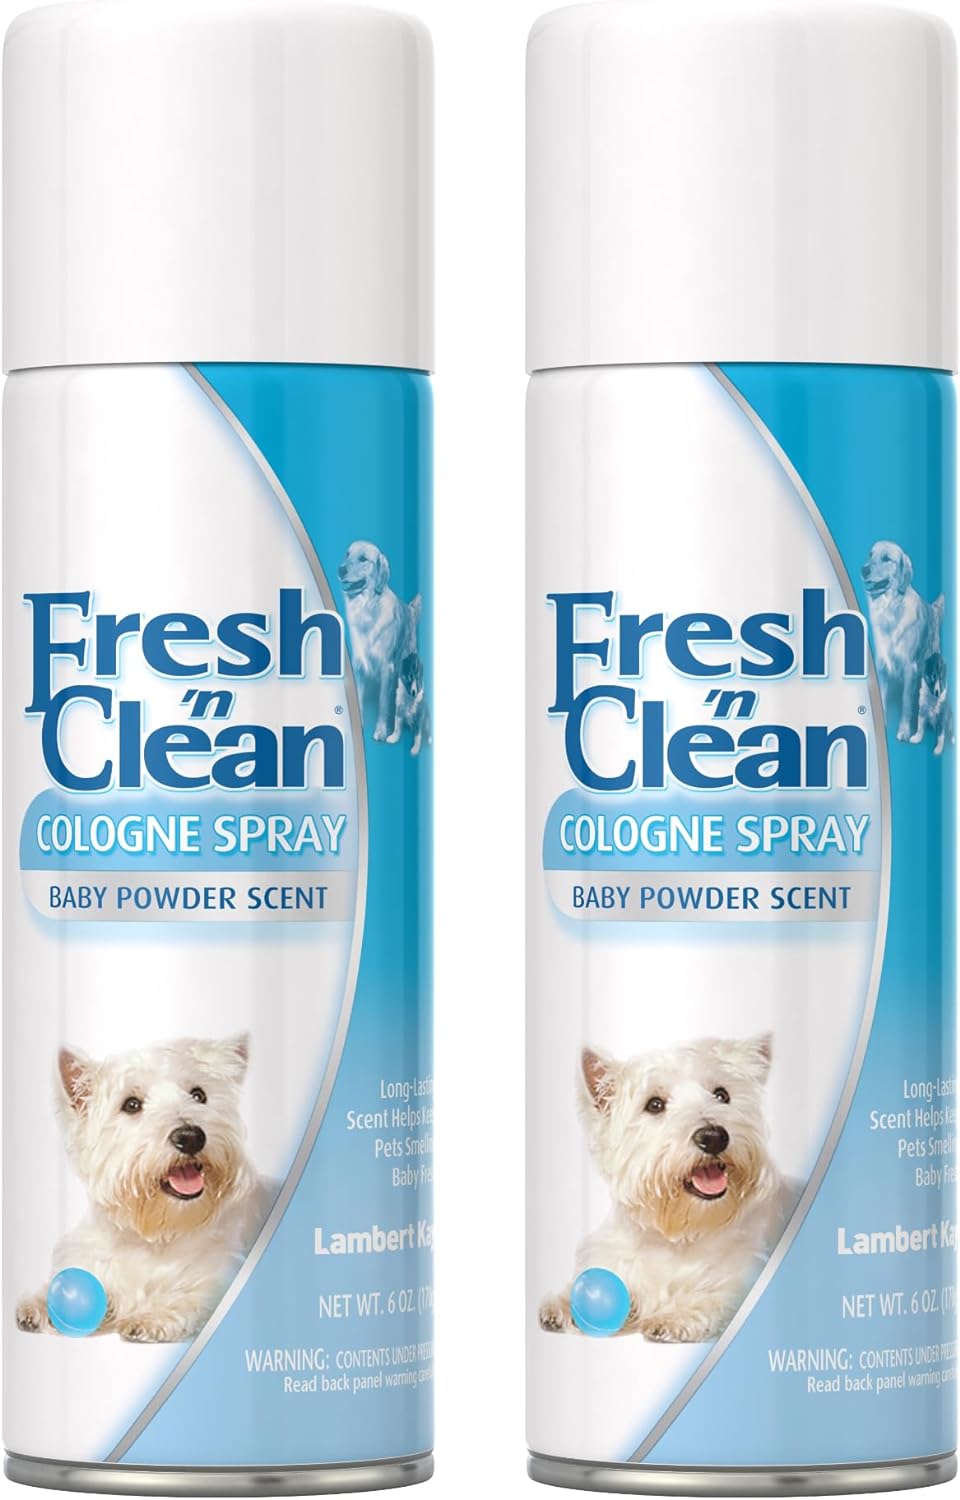 Pet-Ag Fresh n Clean Cologne Spray - Baby Powder Scent - 6 oz, Pack of 2 - Controls Odor & Keeps Dogs Smelling Fresh